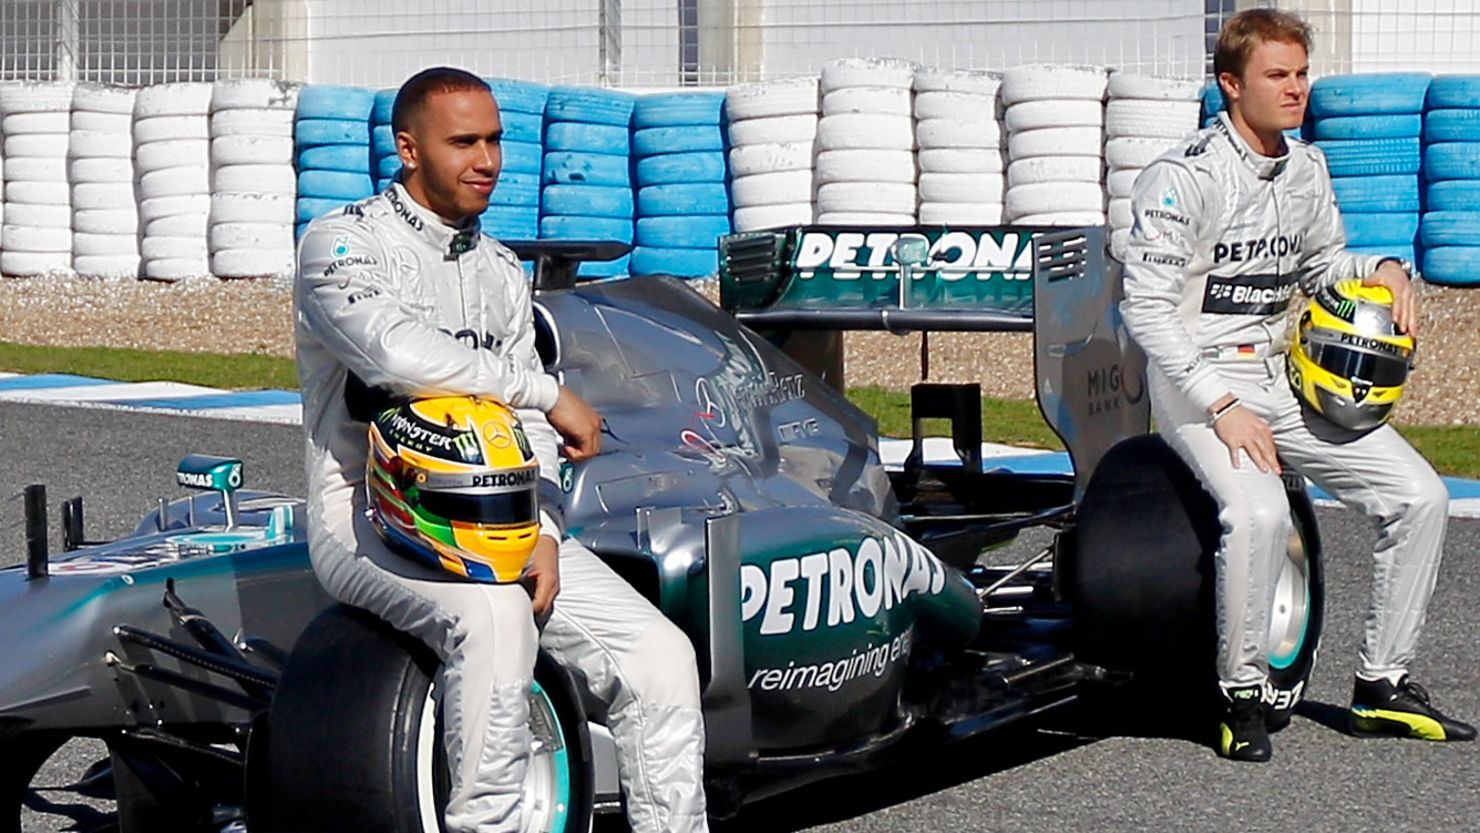 Lewis Hamilton and Nico Rosberg pose with the new Mercedes car for the 2013 Formula One season.